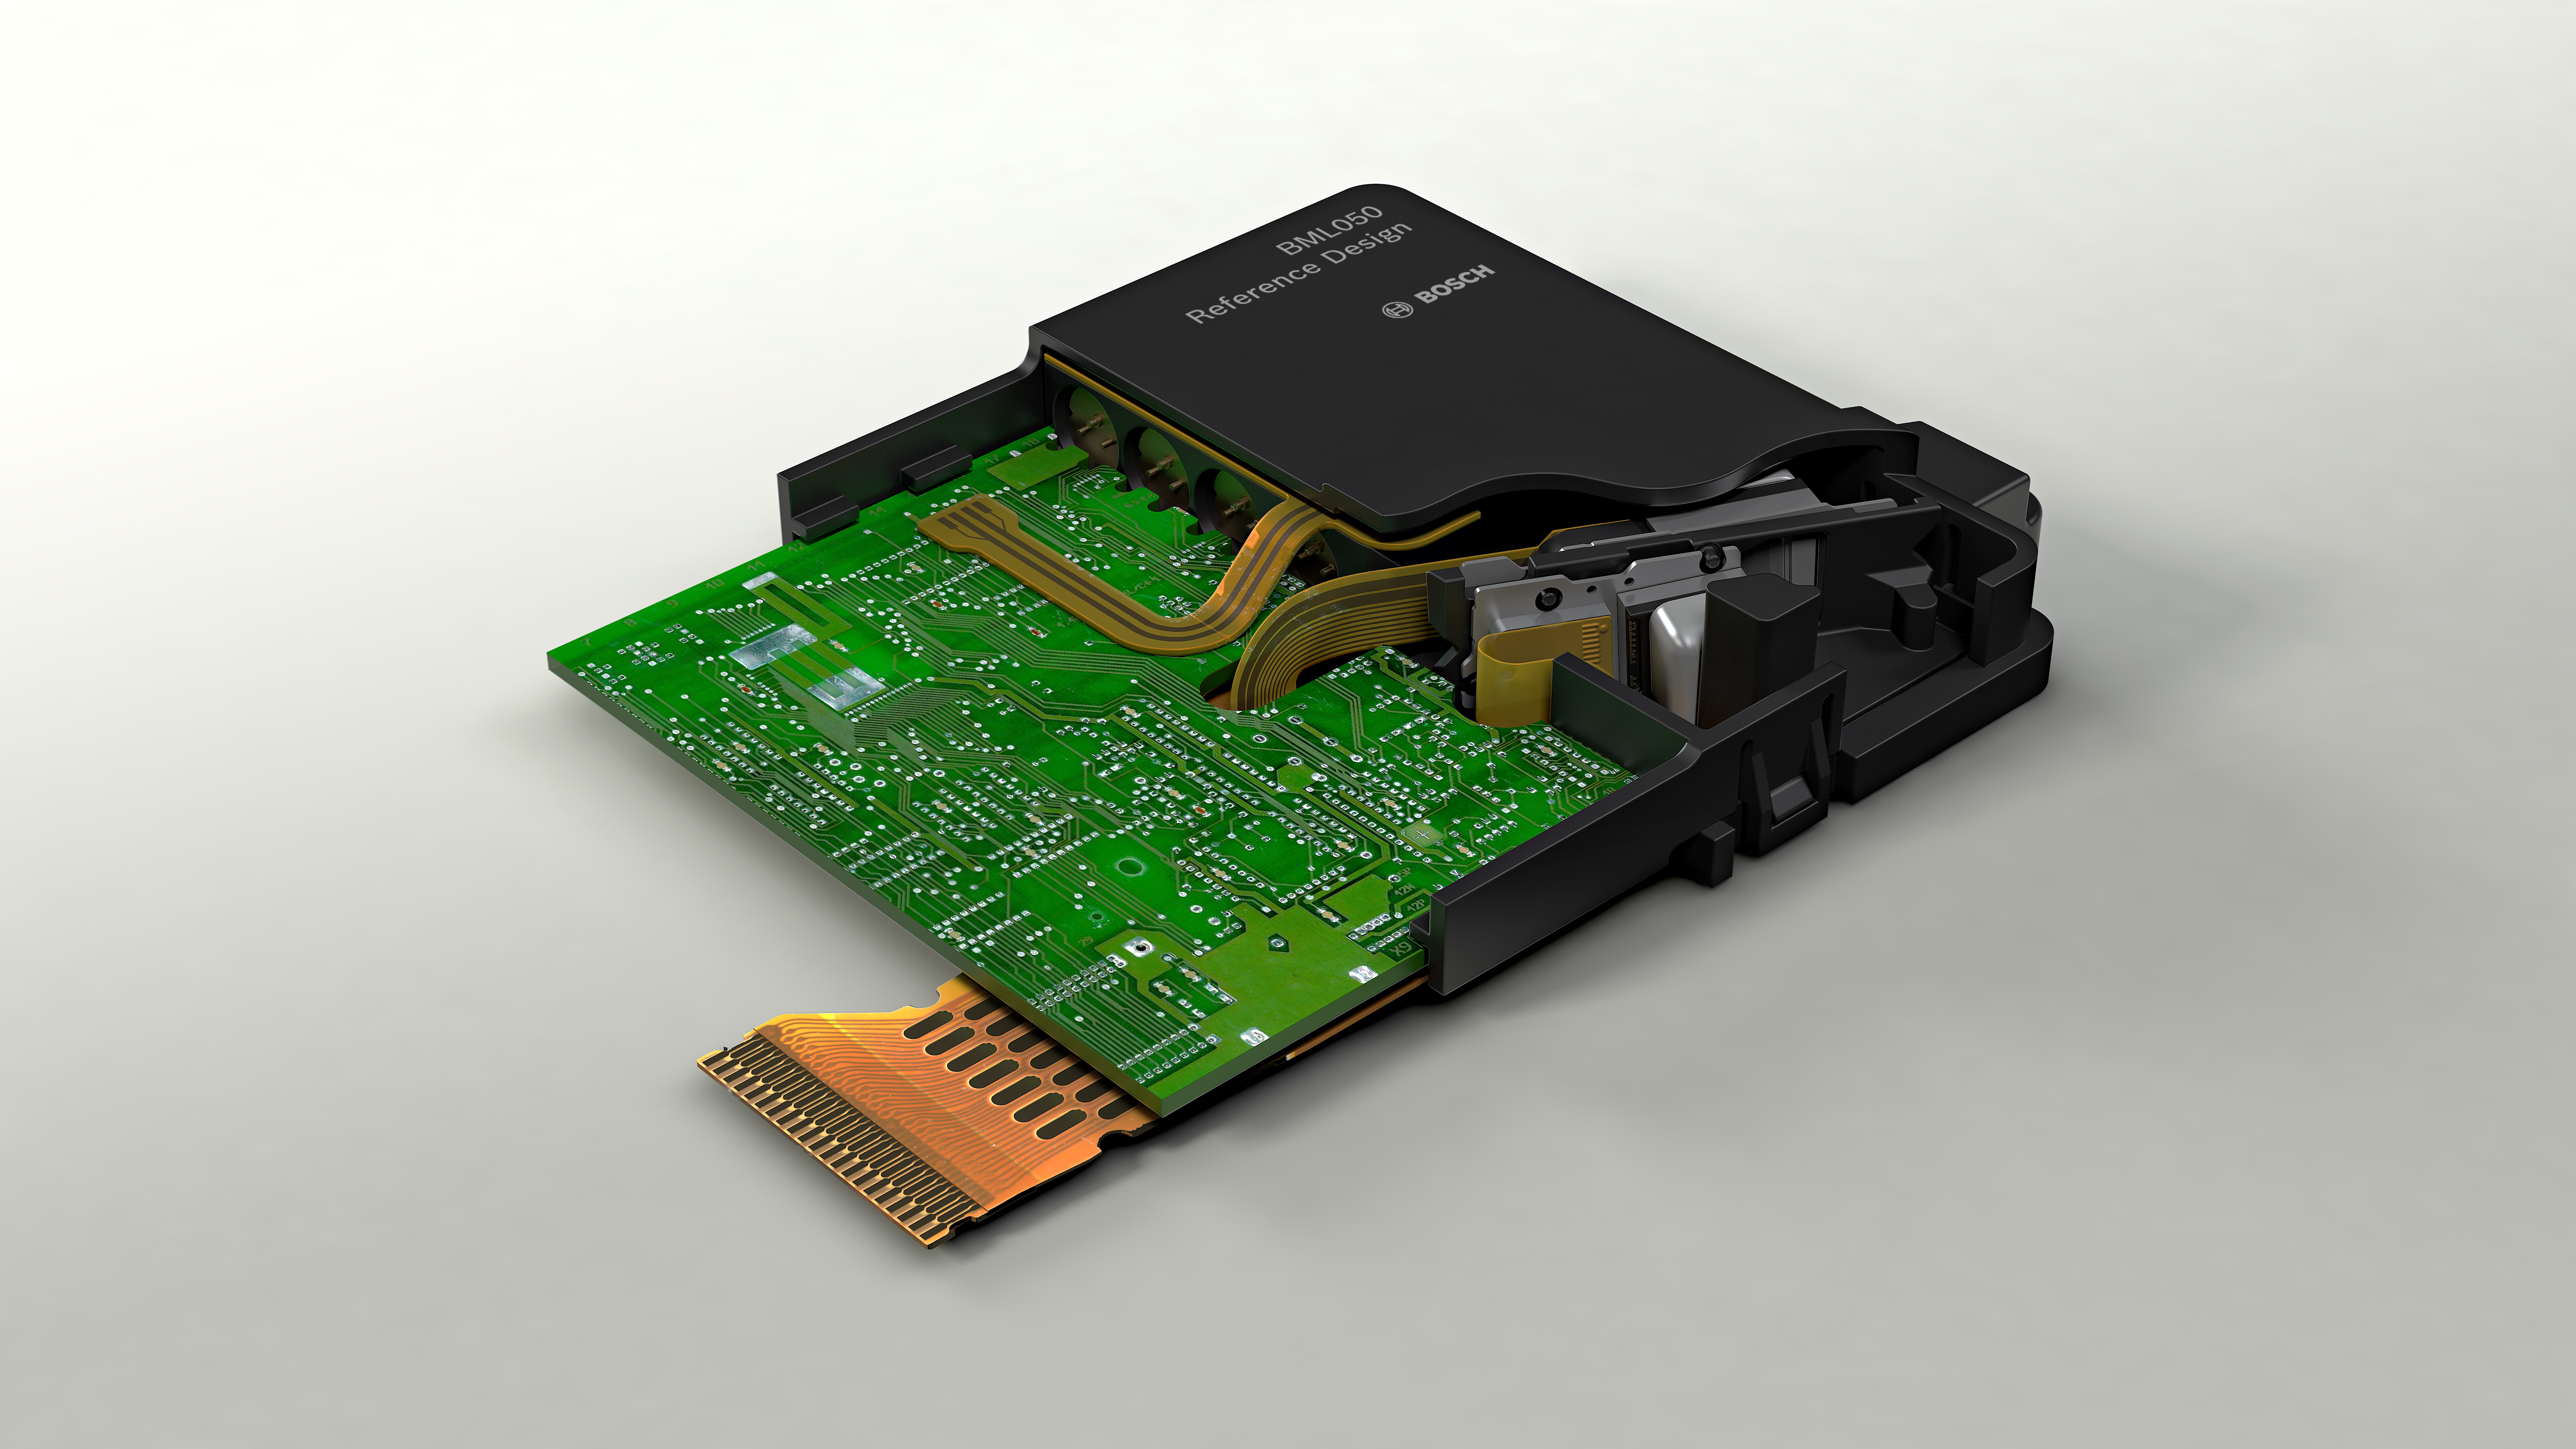 BML050 reference design: robust, compact and easy to integrate solution